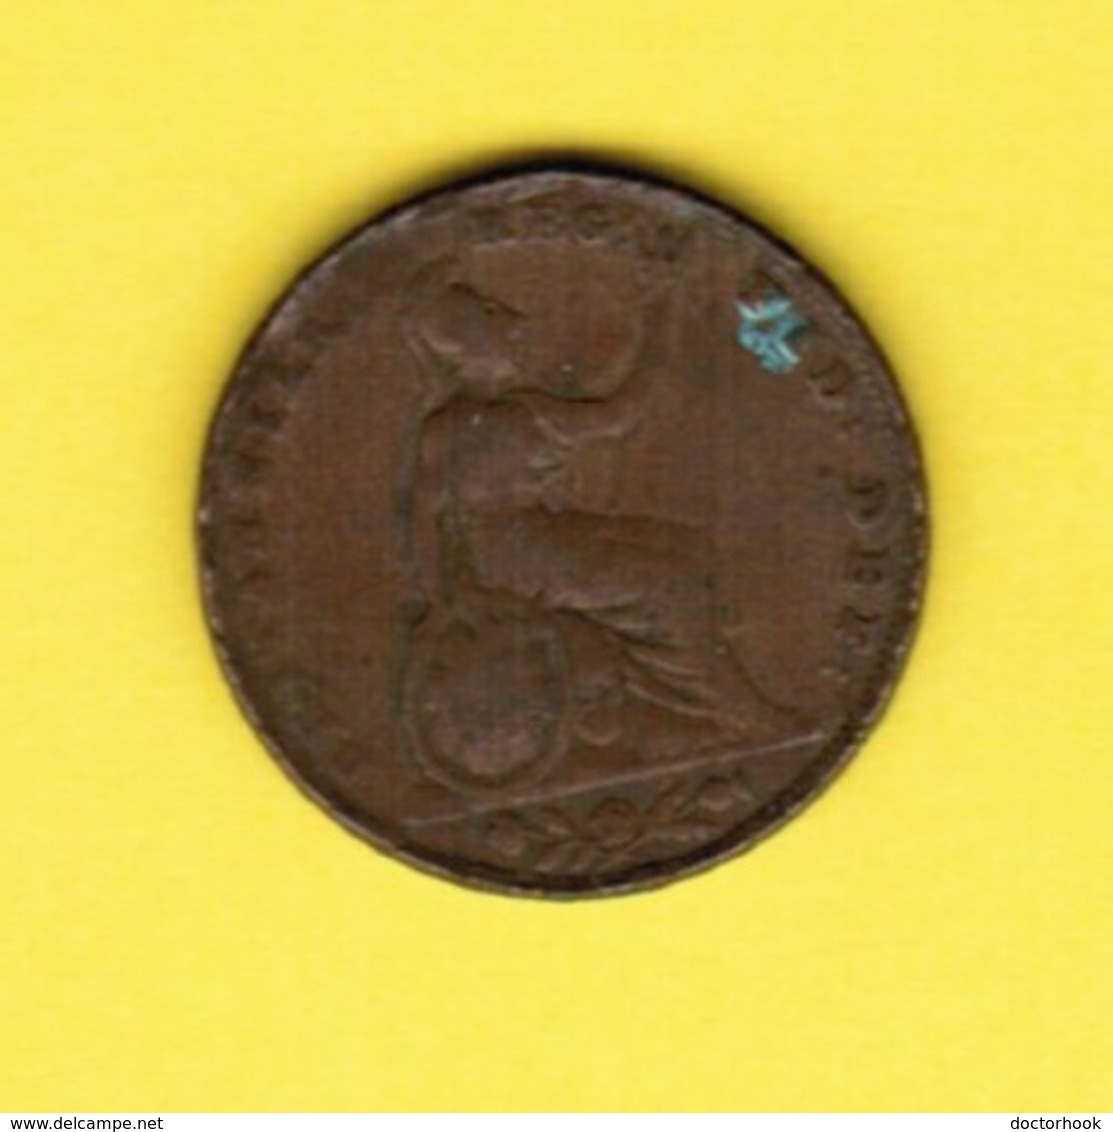 GREAT BRITAIN  1 PENNY 1853 (KM # 739) #5394 - D. 1 Penny